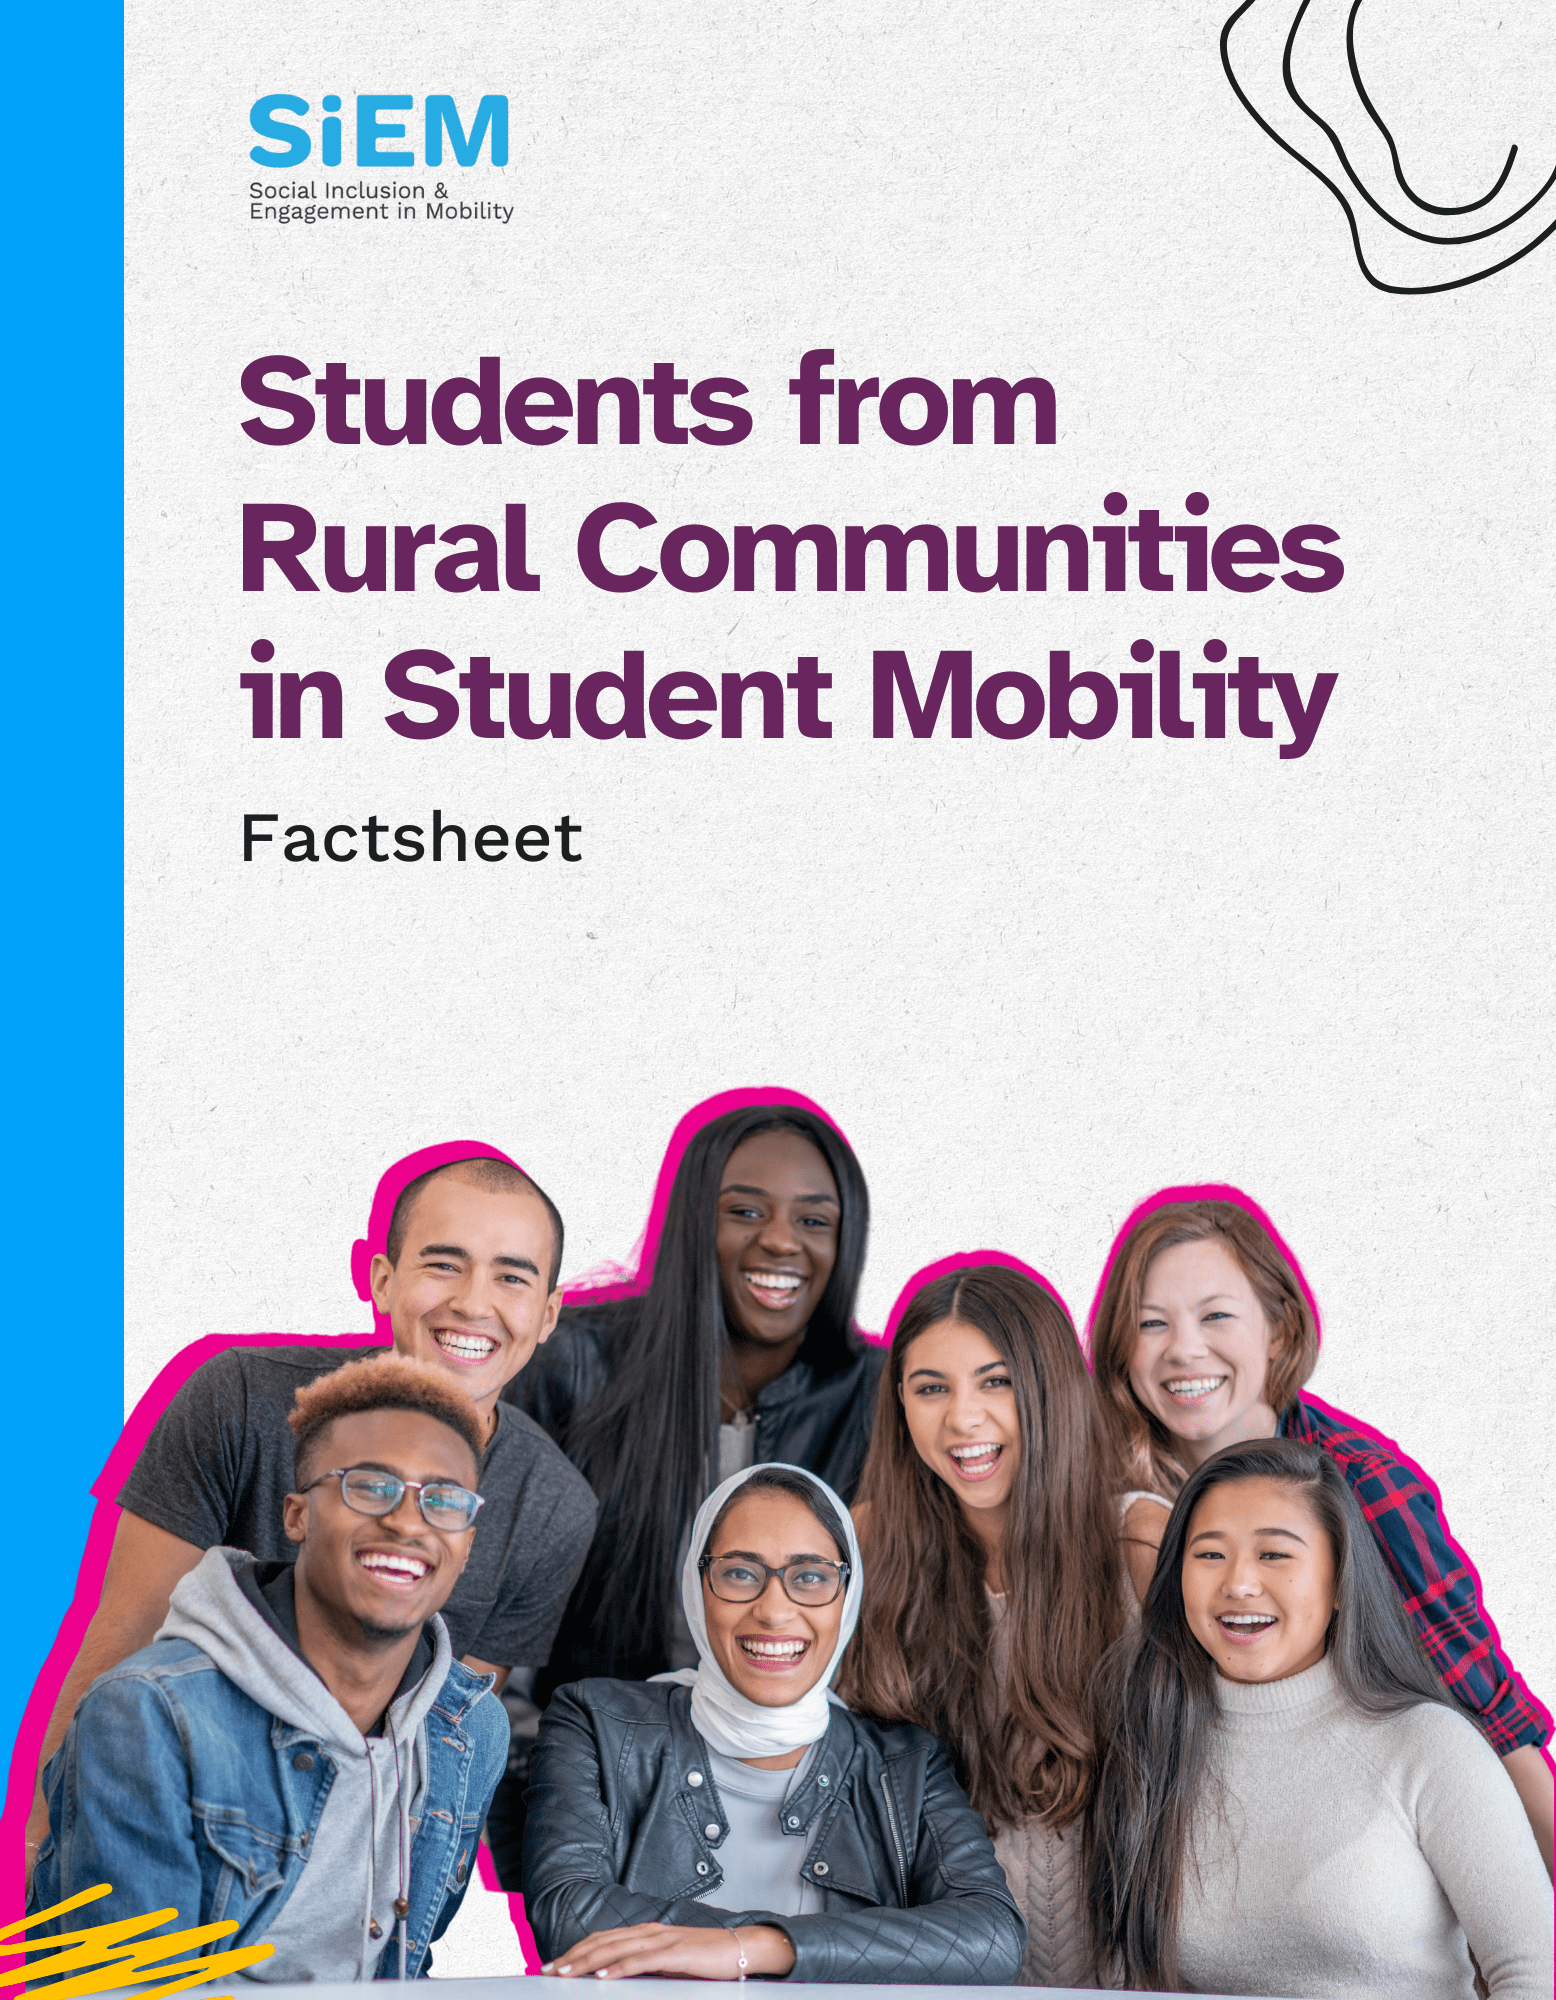 Factsheet - Students from Rural Communities in Student Mobility